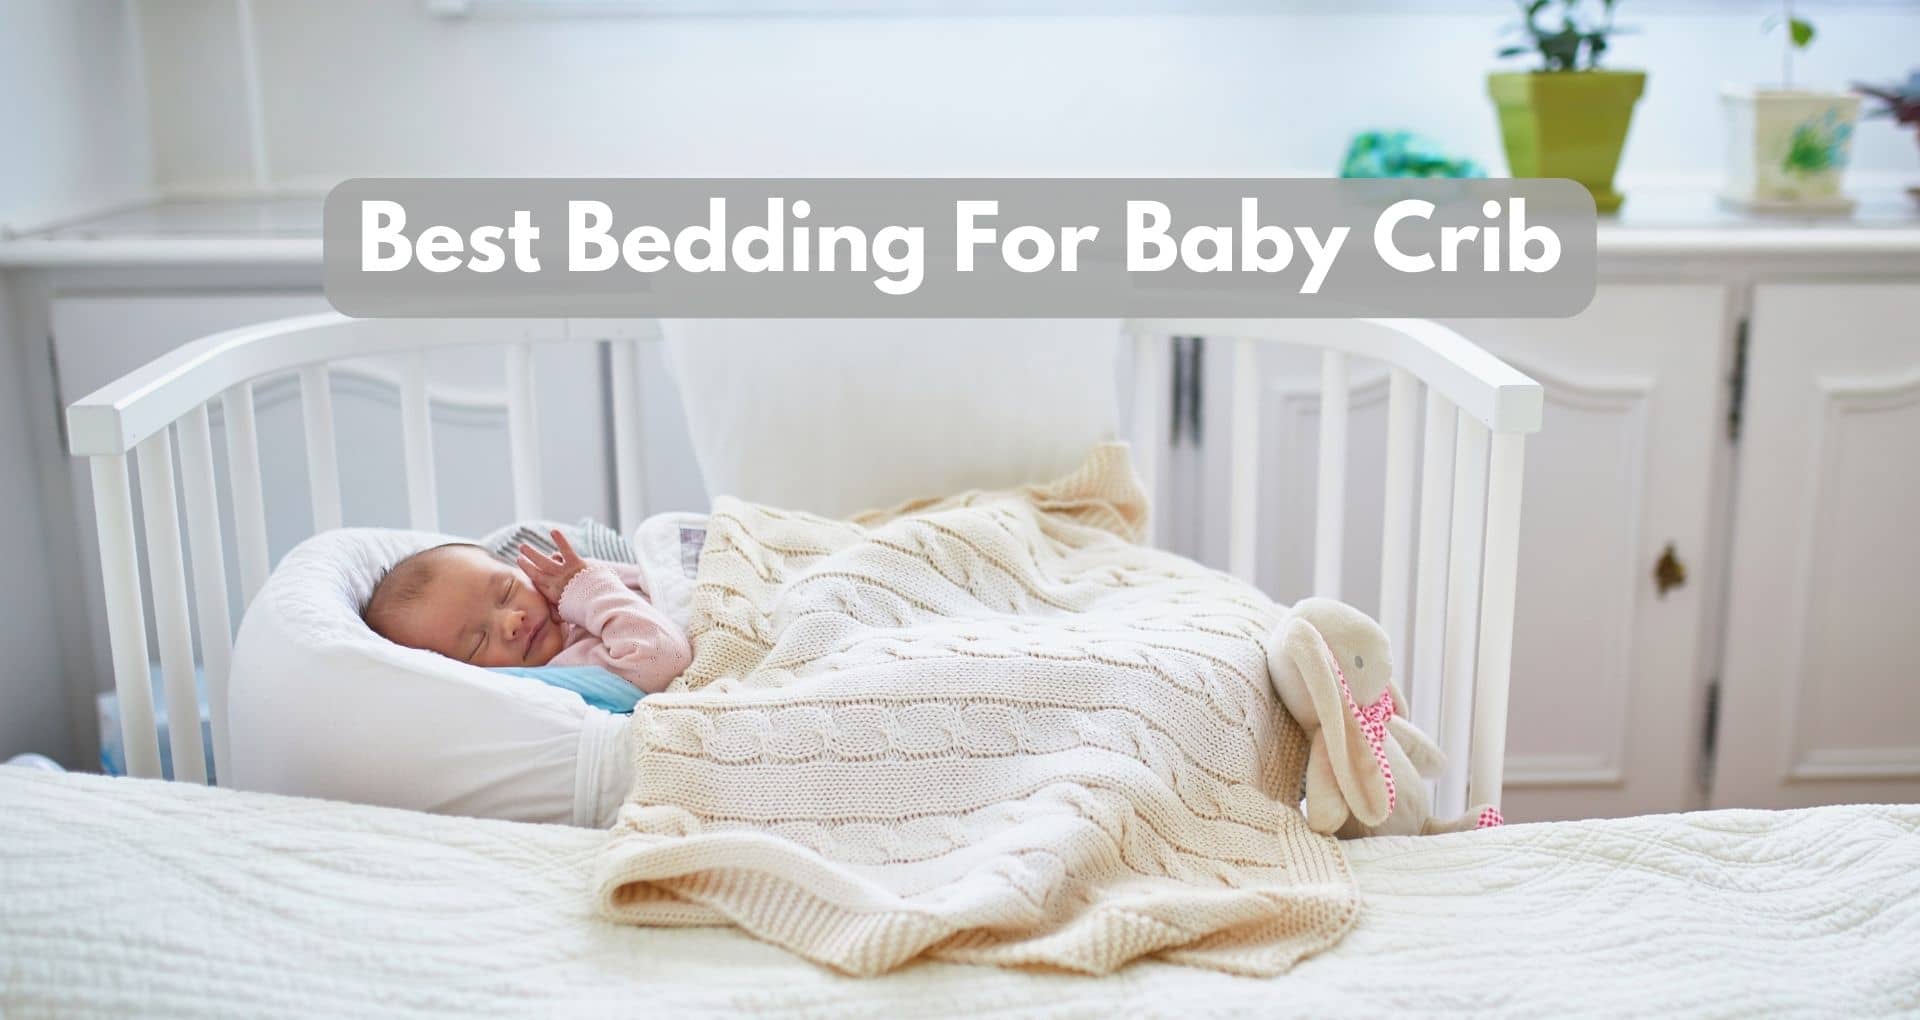 How to Choose Best Bedding For Baby Crib?